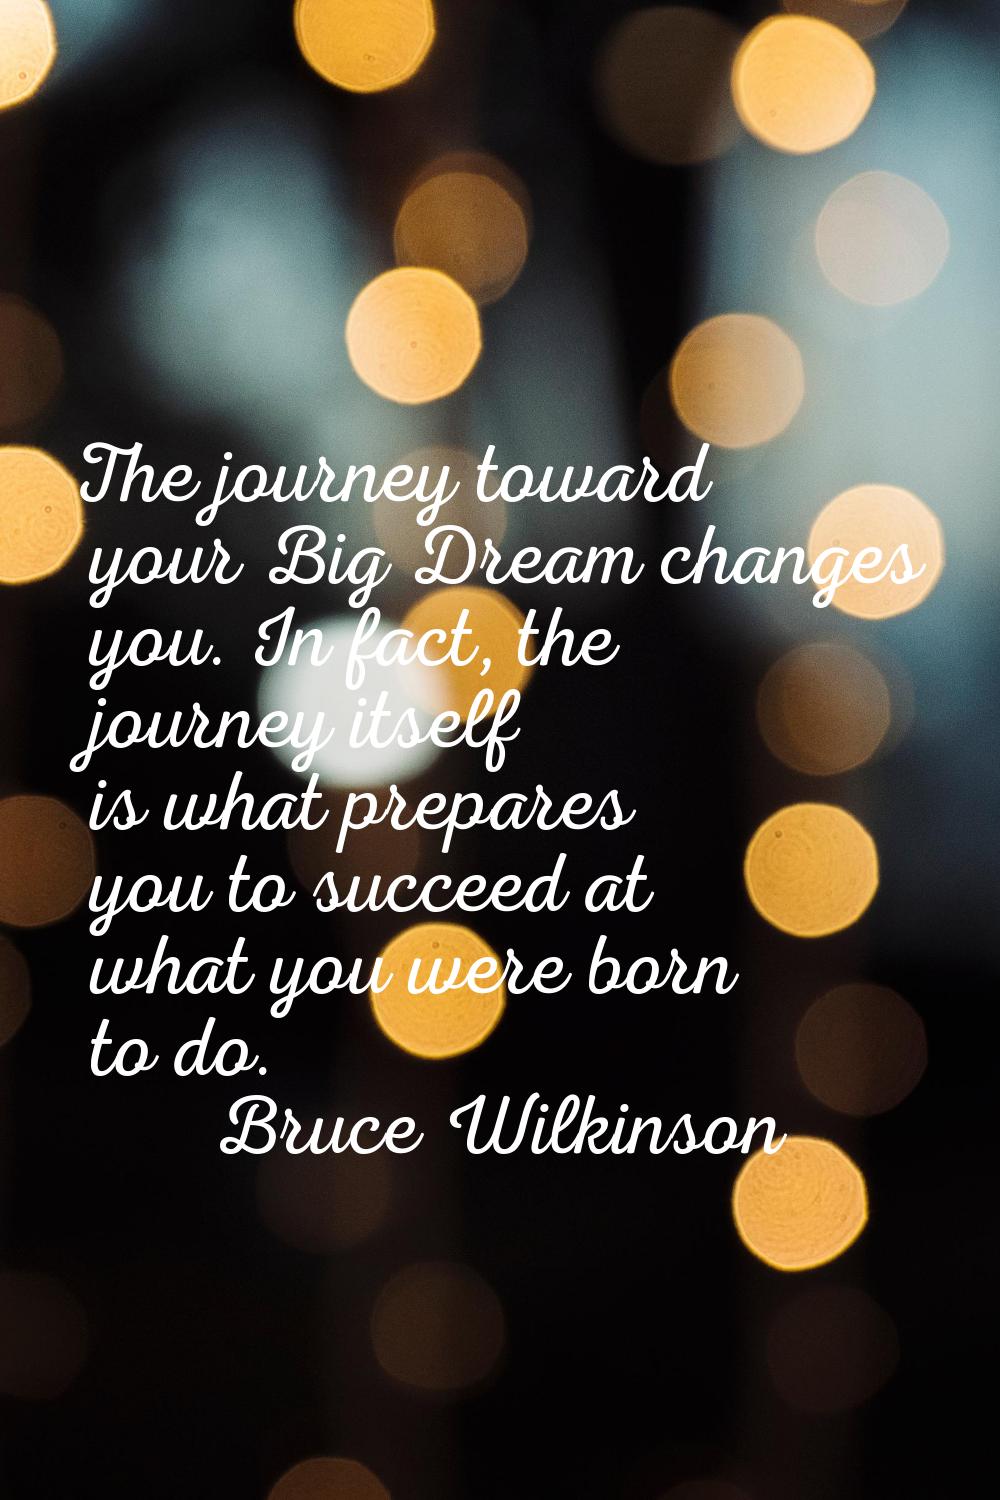 The journey toward your Big Dream changes you. In fact, the journey itself is what prepares you to 